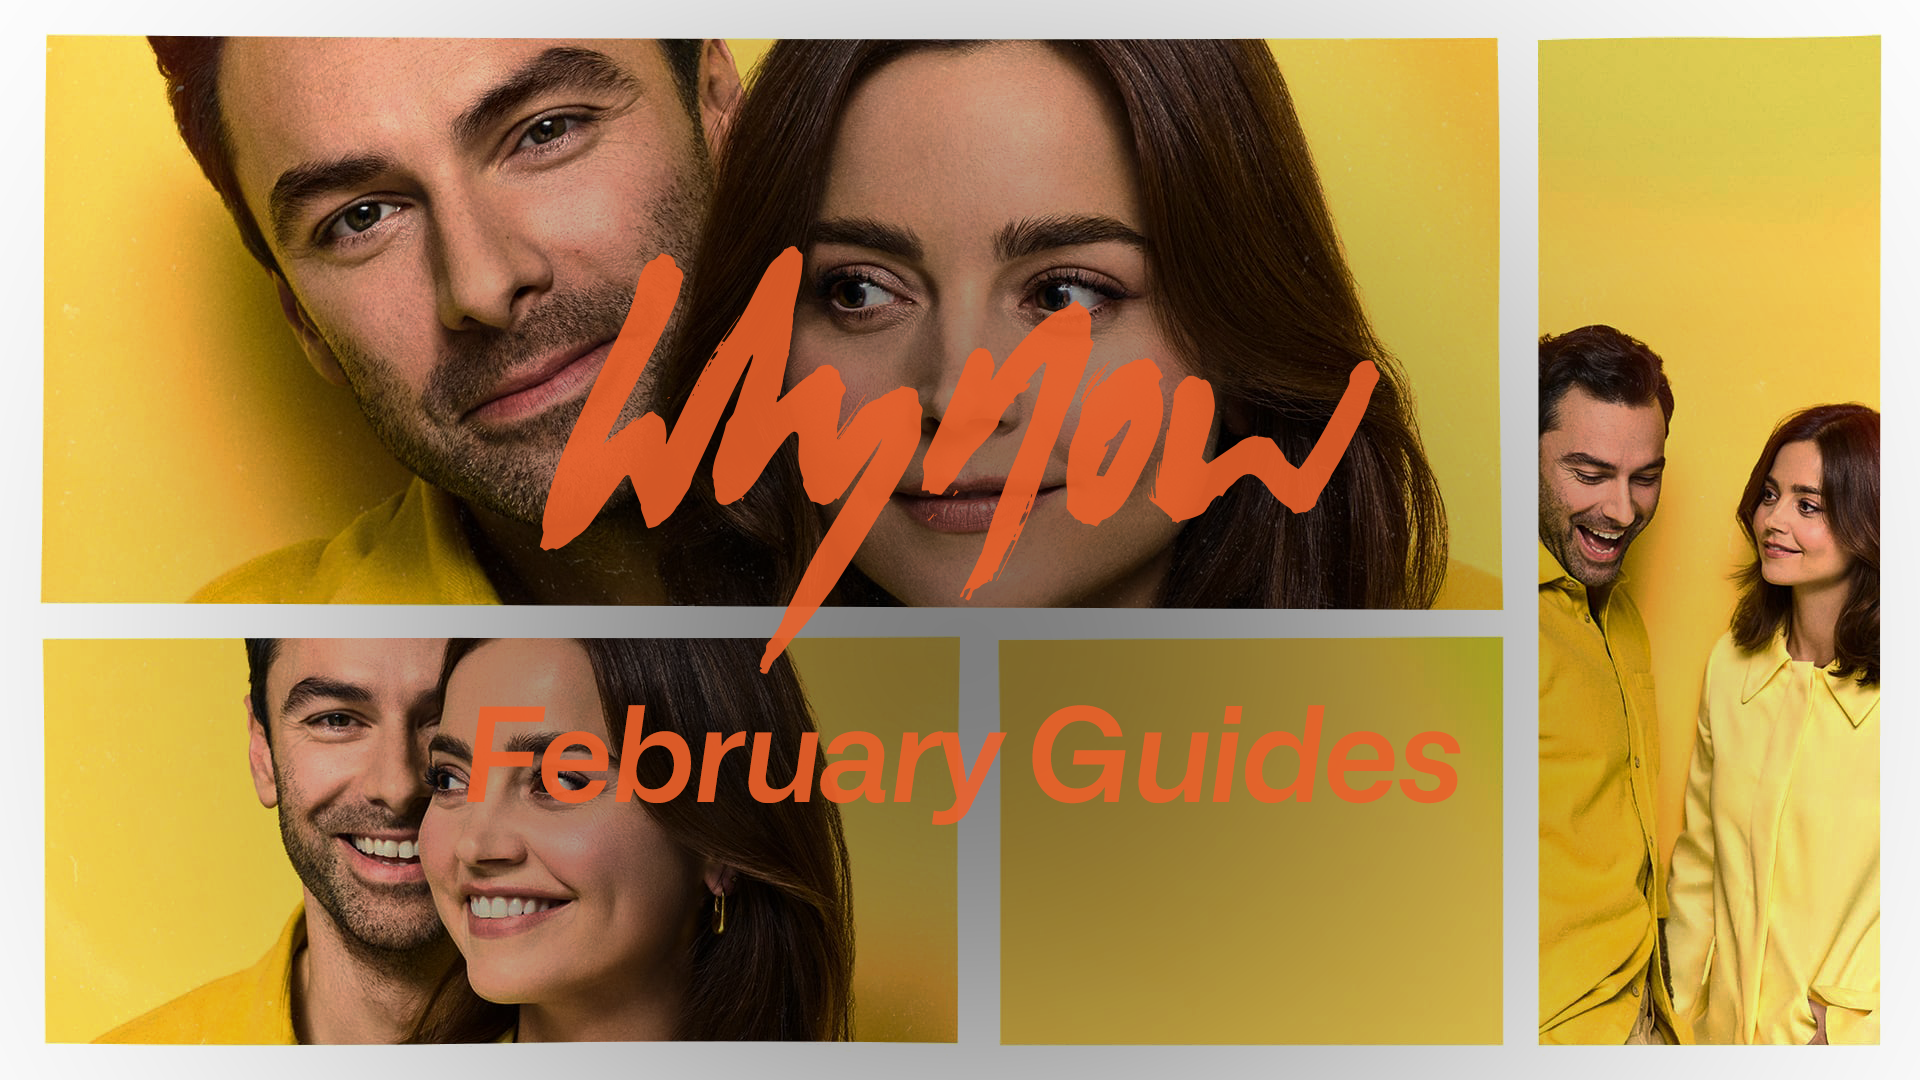 London February theatre guide whynow